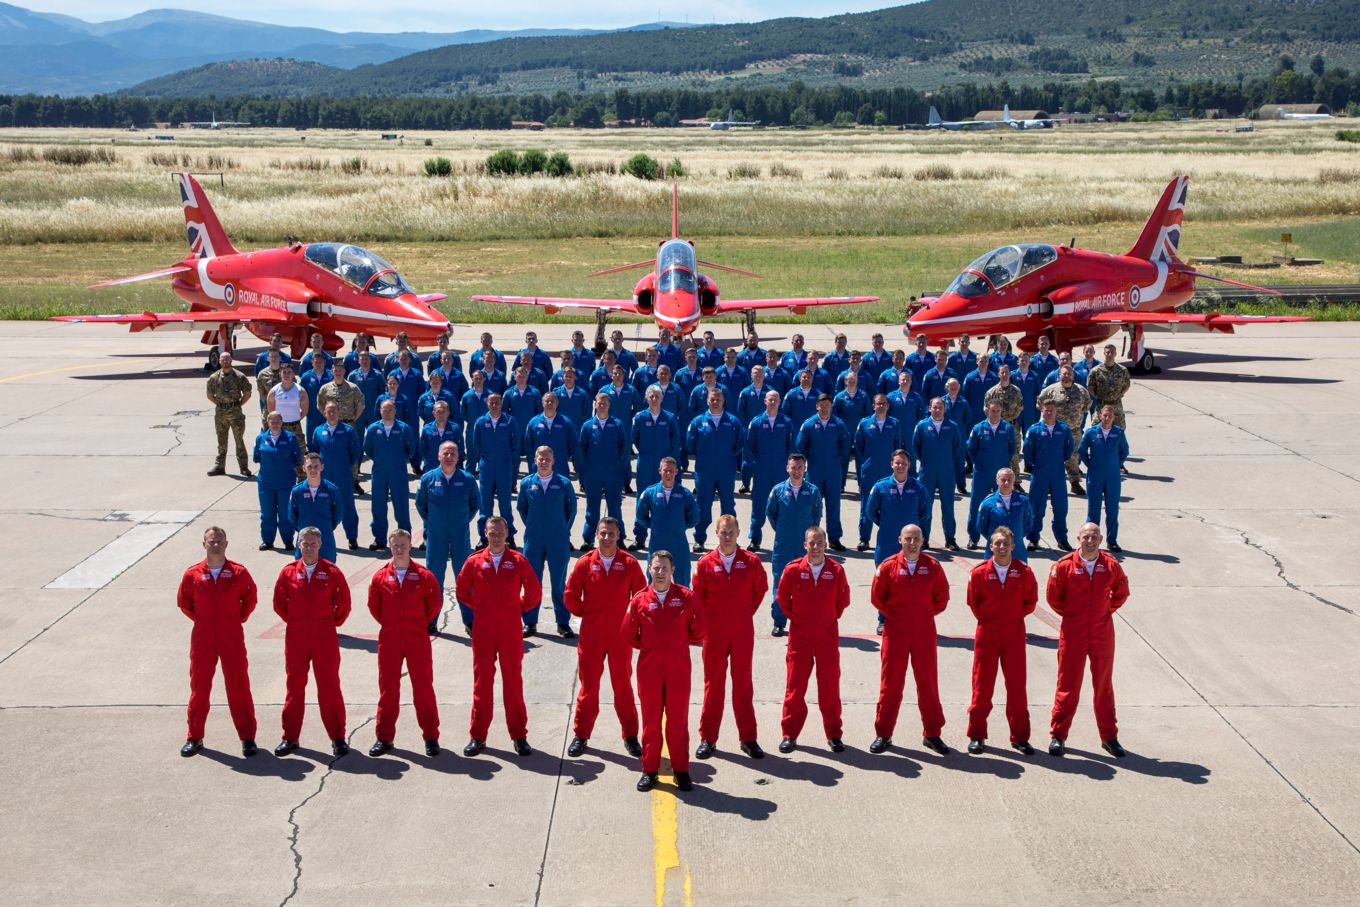 The 2019 Red Arrows